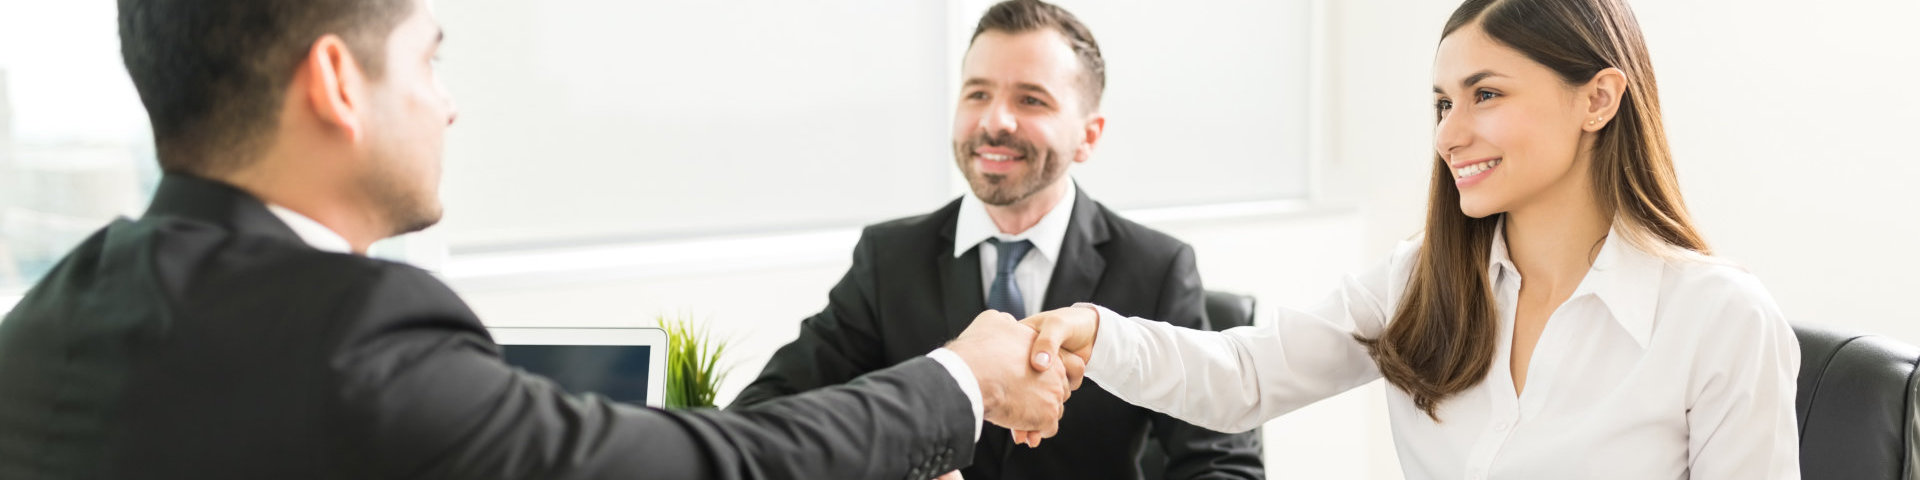 Smiling businesswoman shaking hand with employee at desk in office